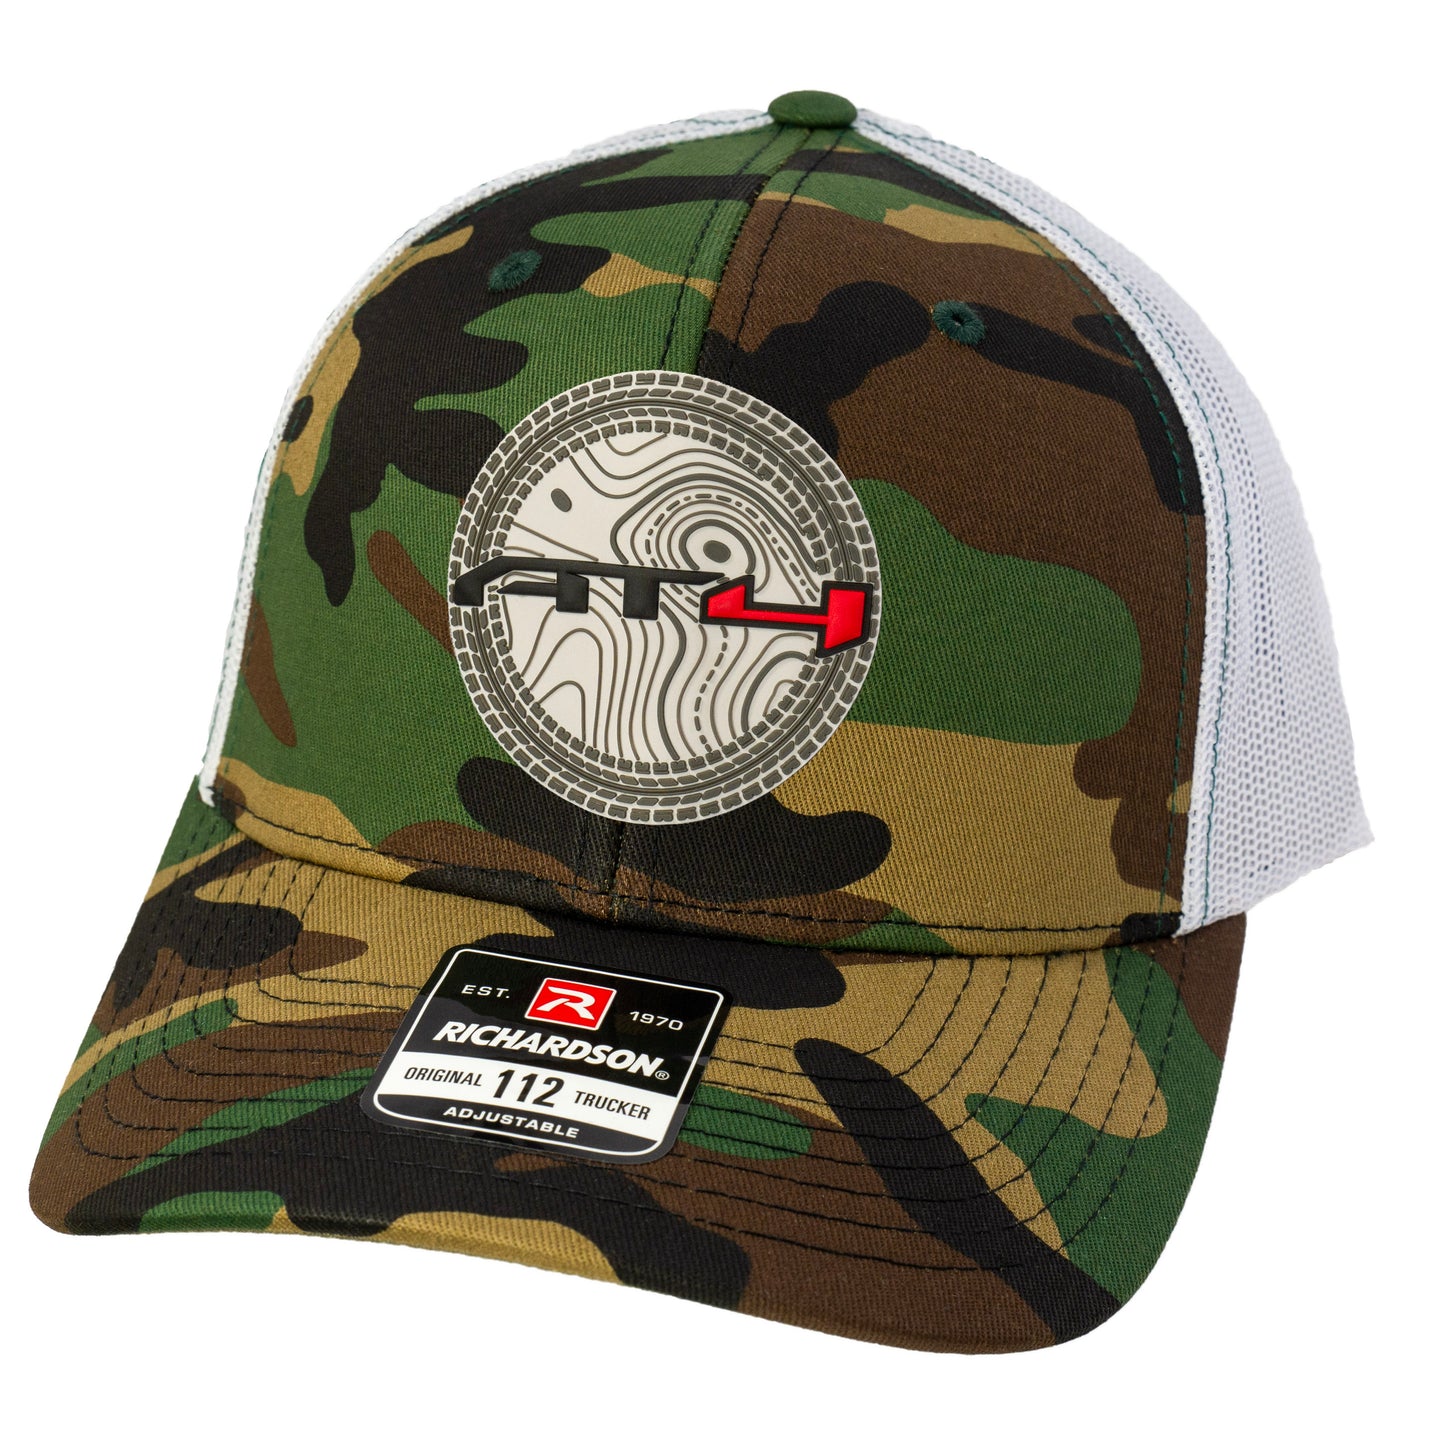 AT4 3D Patterned Snapback Trucker Hat- Army Camo/ White - Ten Gallon Hat Co.